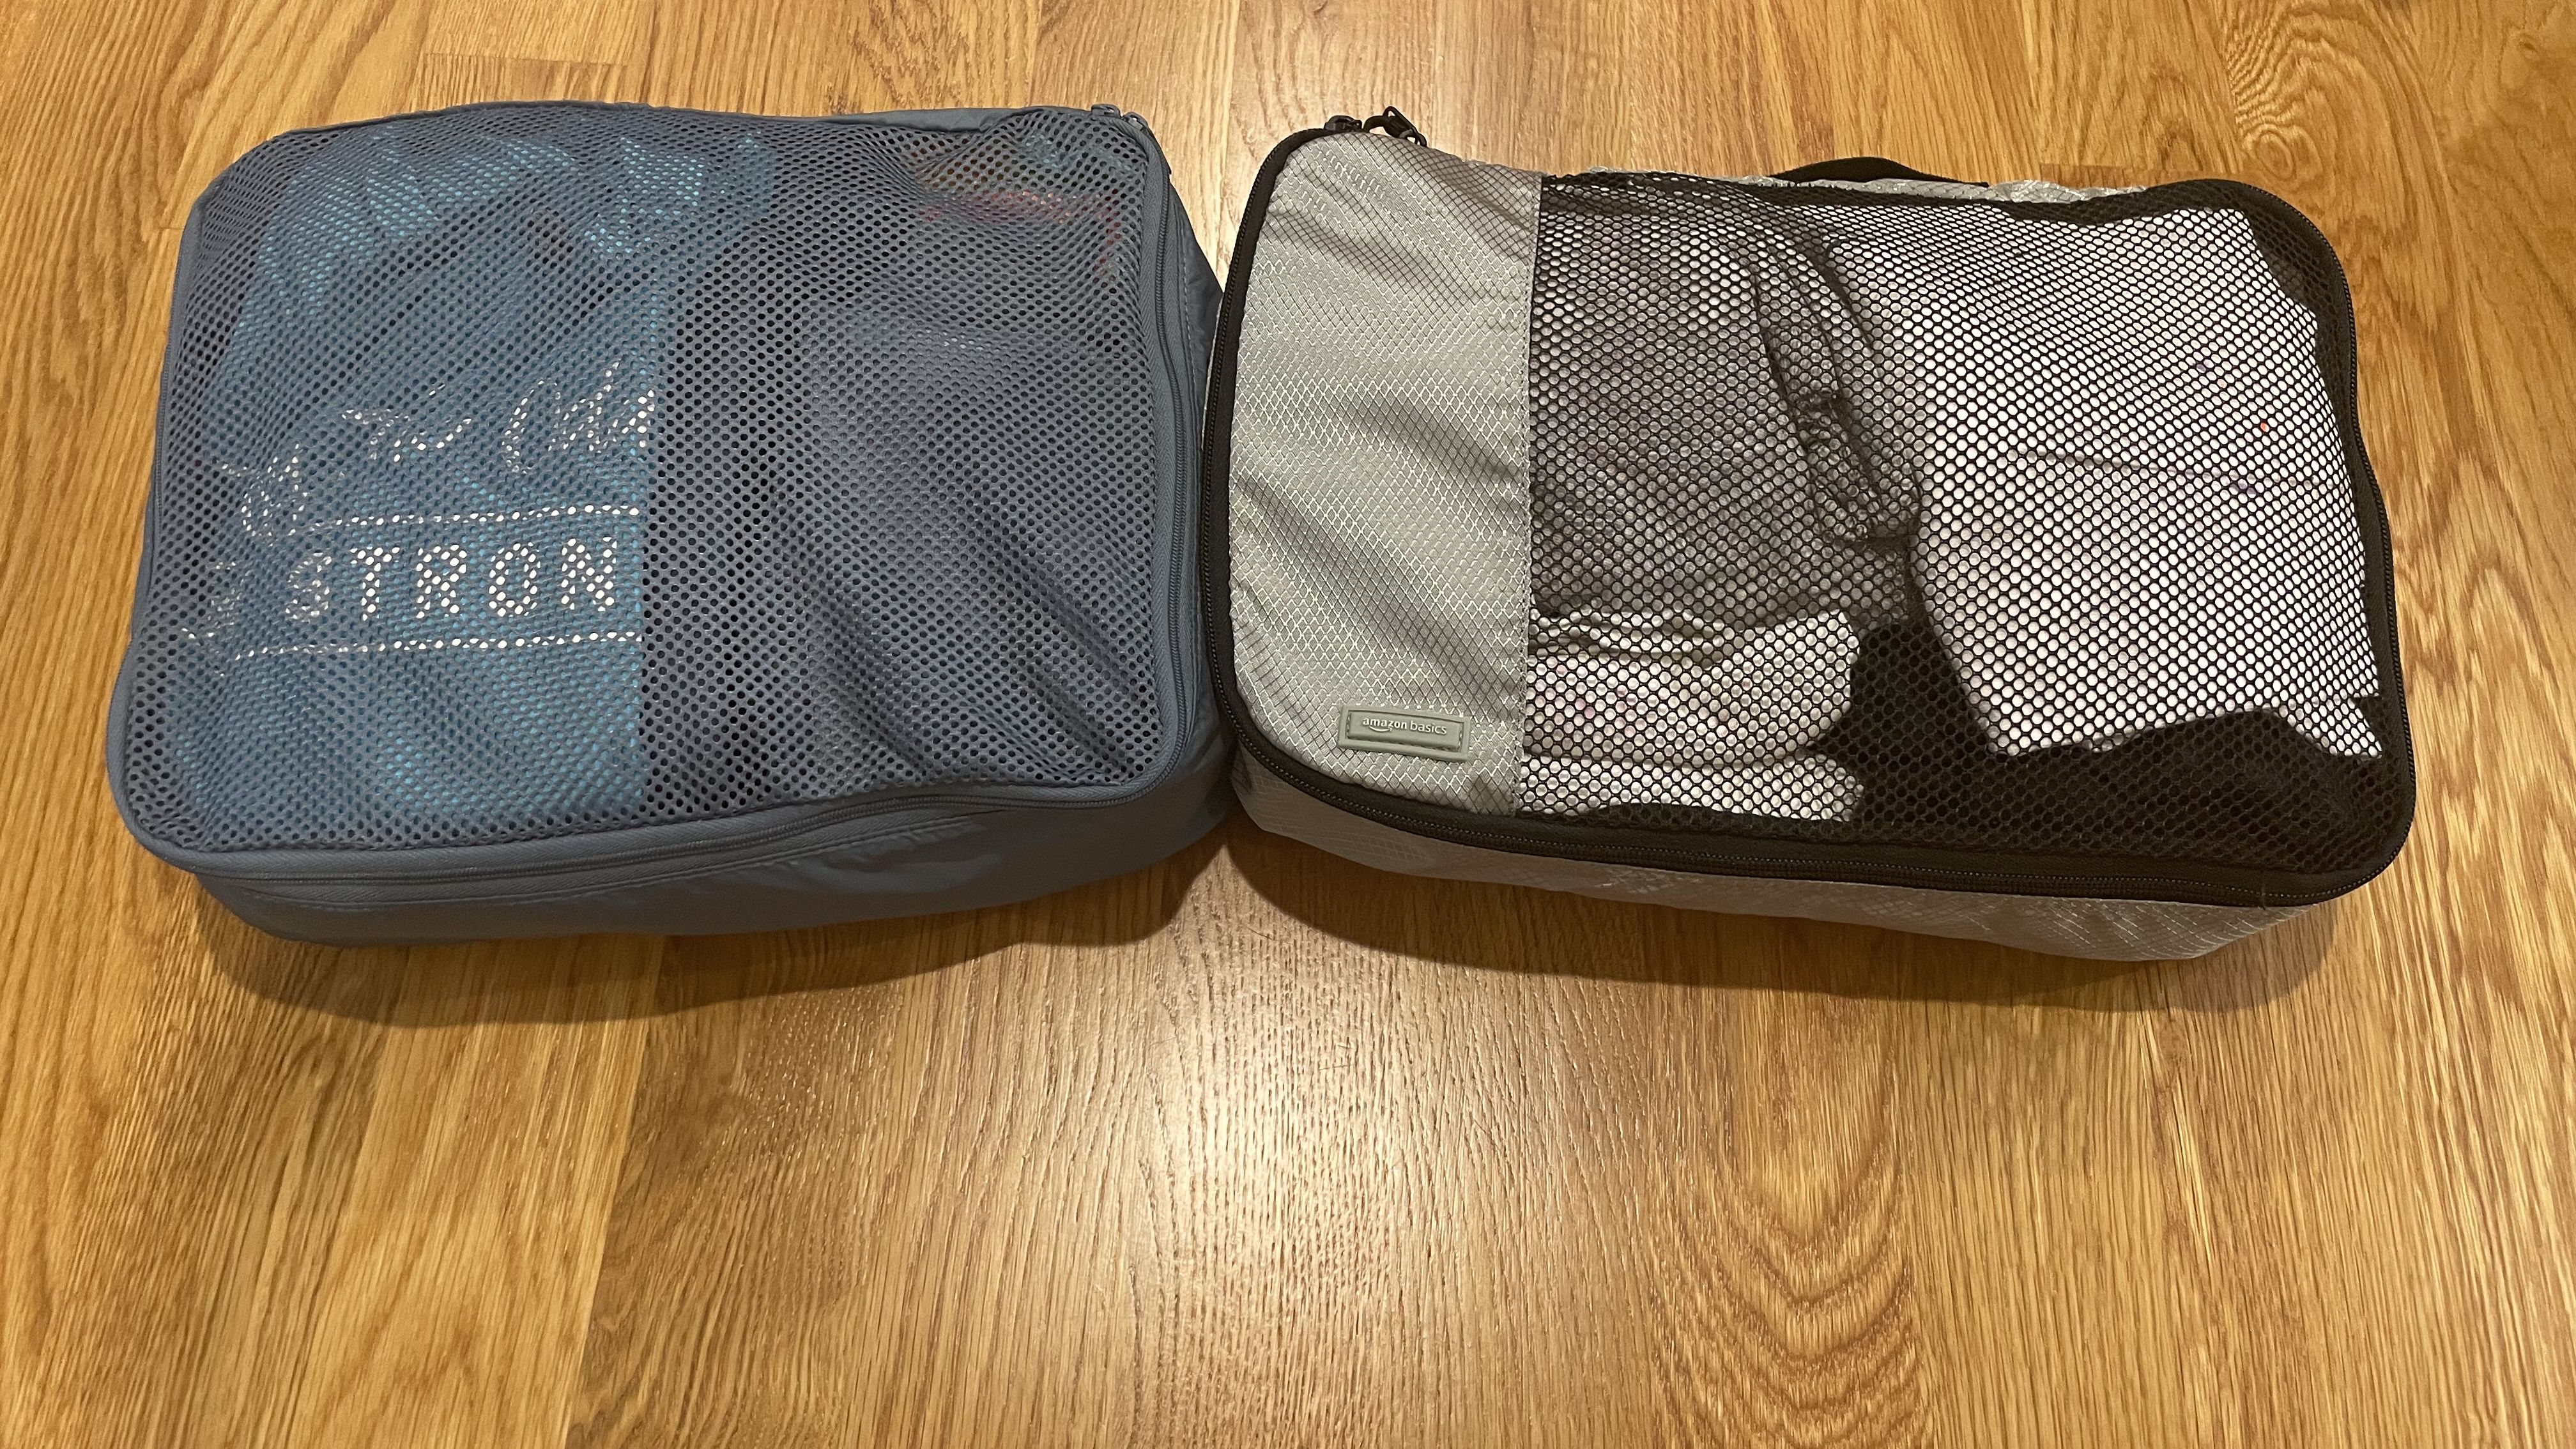 Packing Cubes Have Completely Changed How I Travel